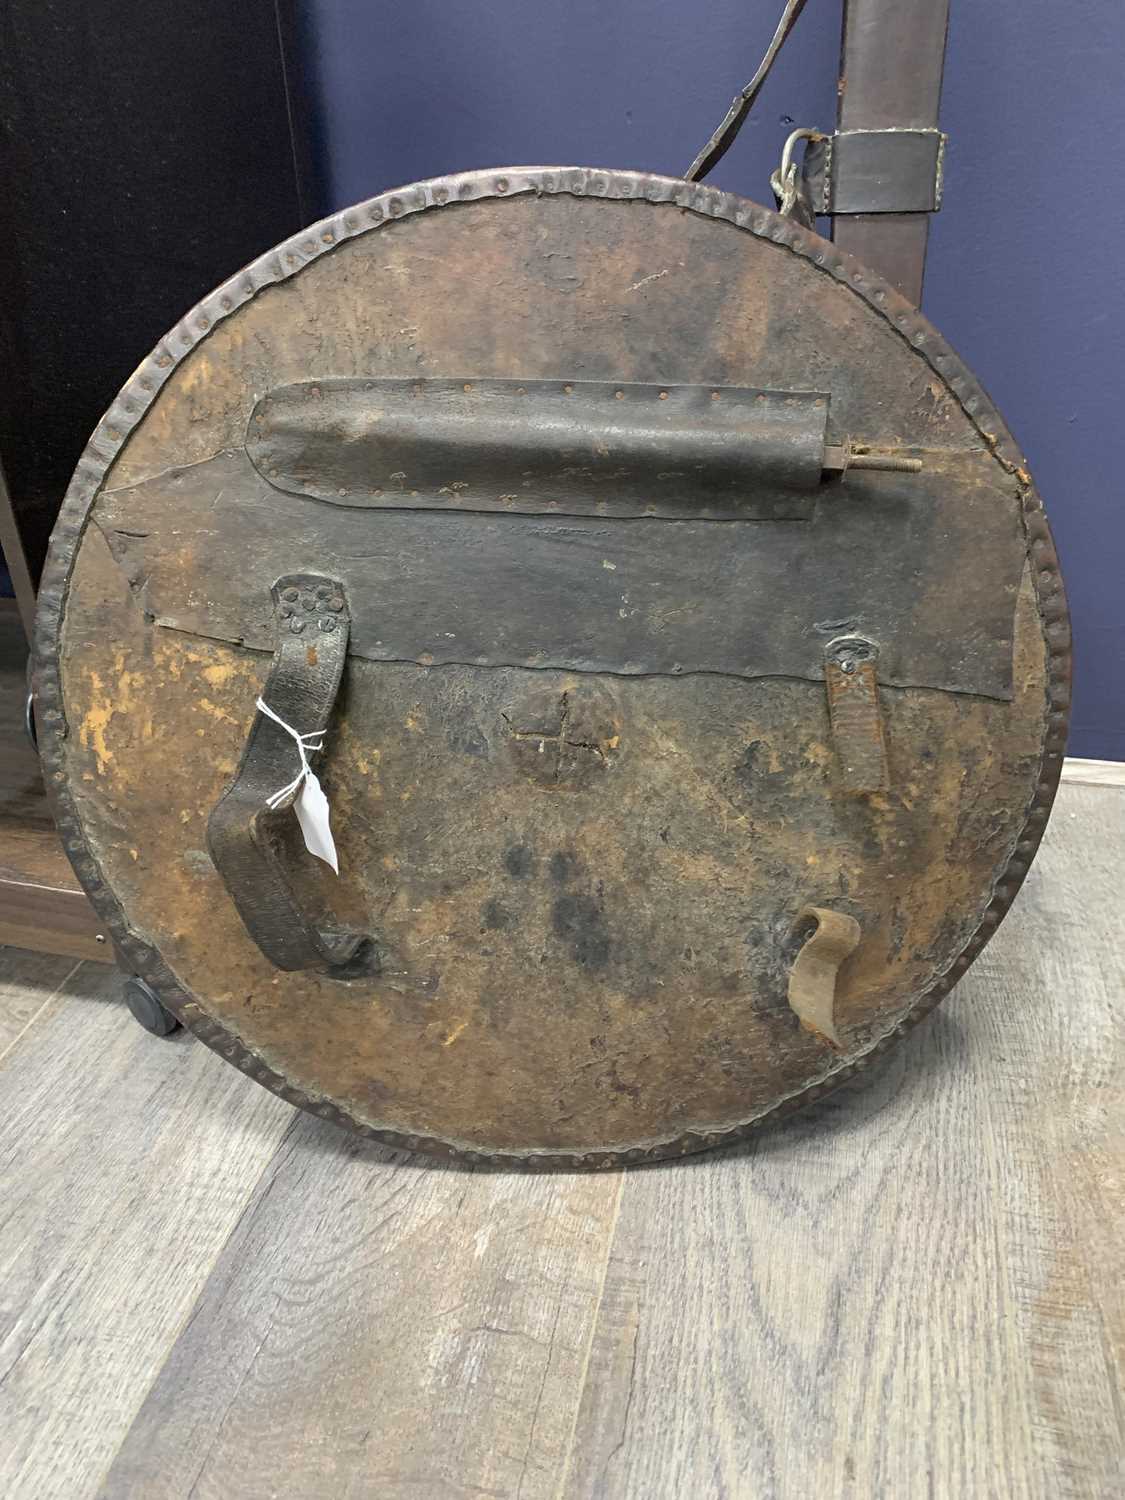 SCOTTISH CLAYMORE SWORD, ALONG WITH A LEATHER BUCKLER SHIELD - Image 3 of 9